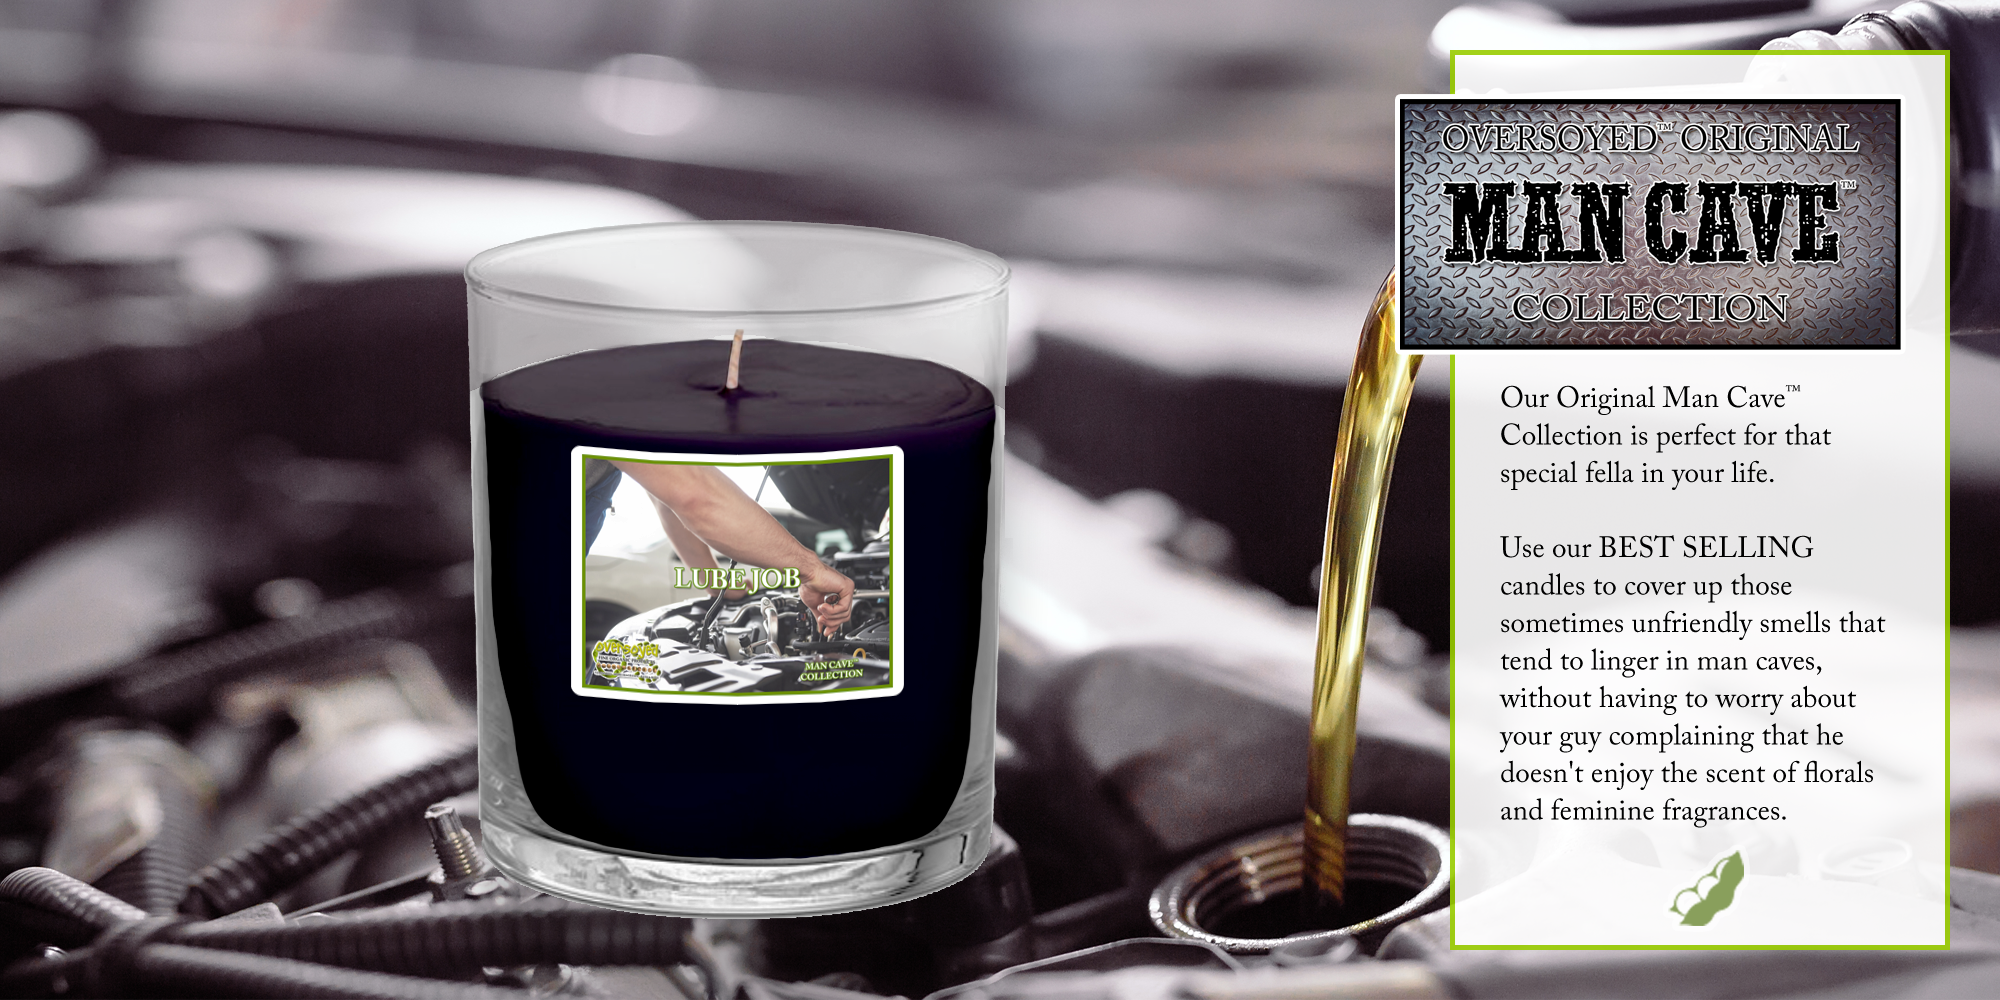 OverSoyed Fine Organic Products - OverSoyed Original Man Cave Man Candles™